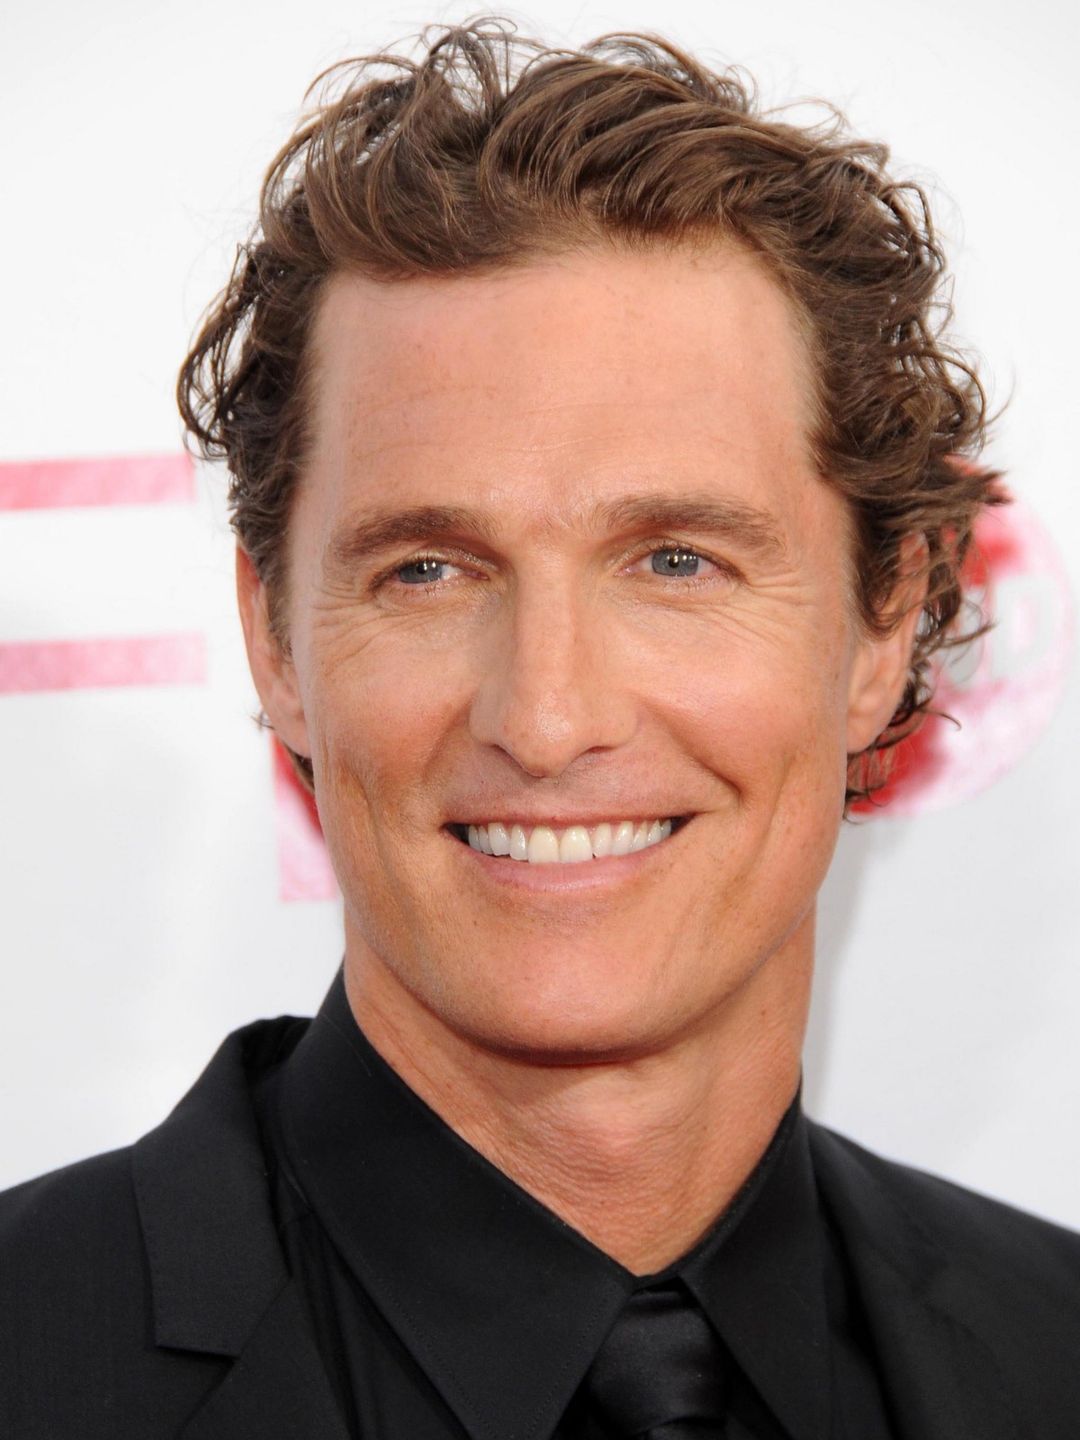 Matthew McConaughey does he have kids